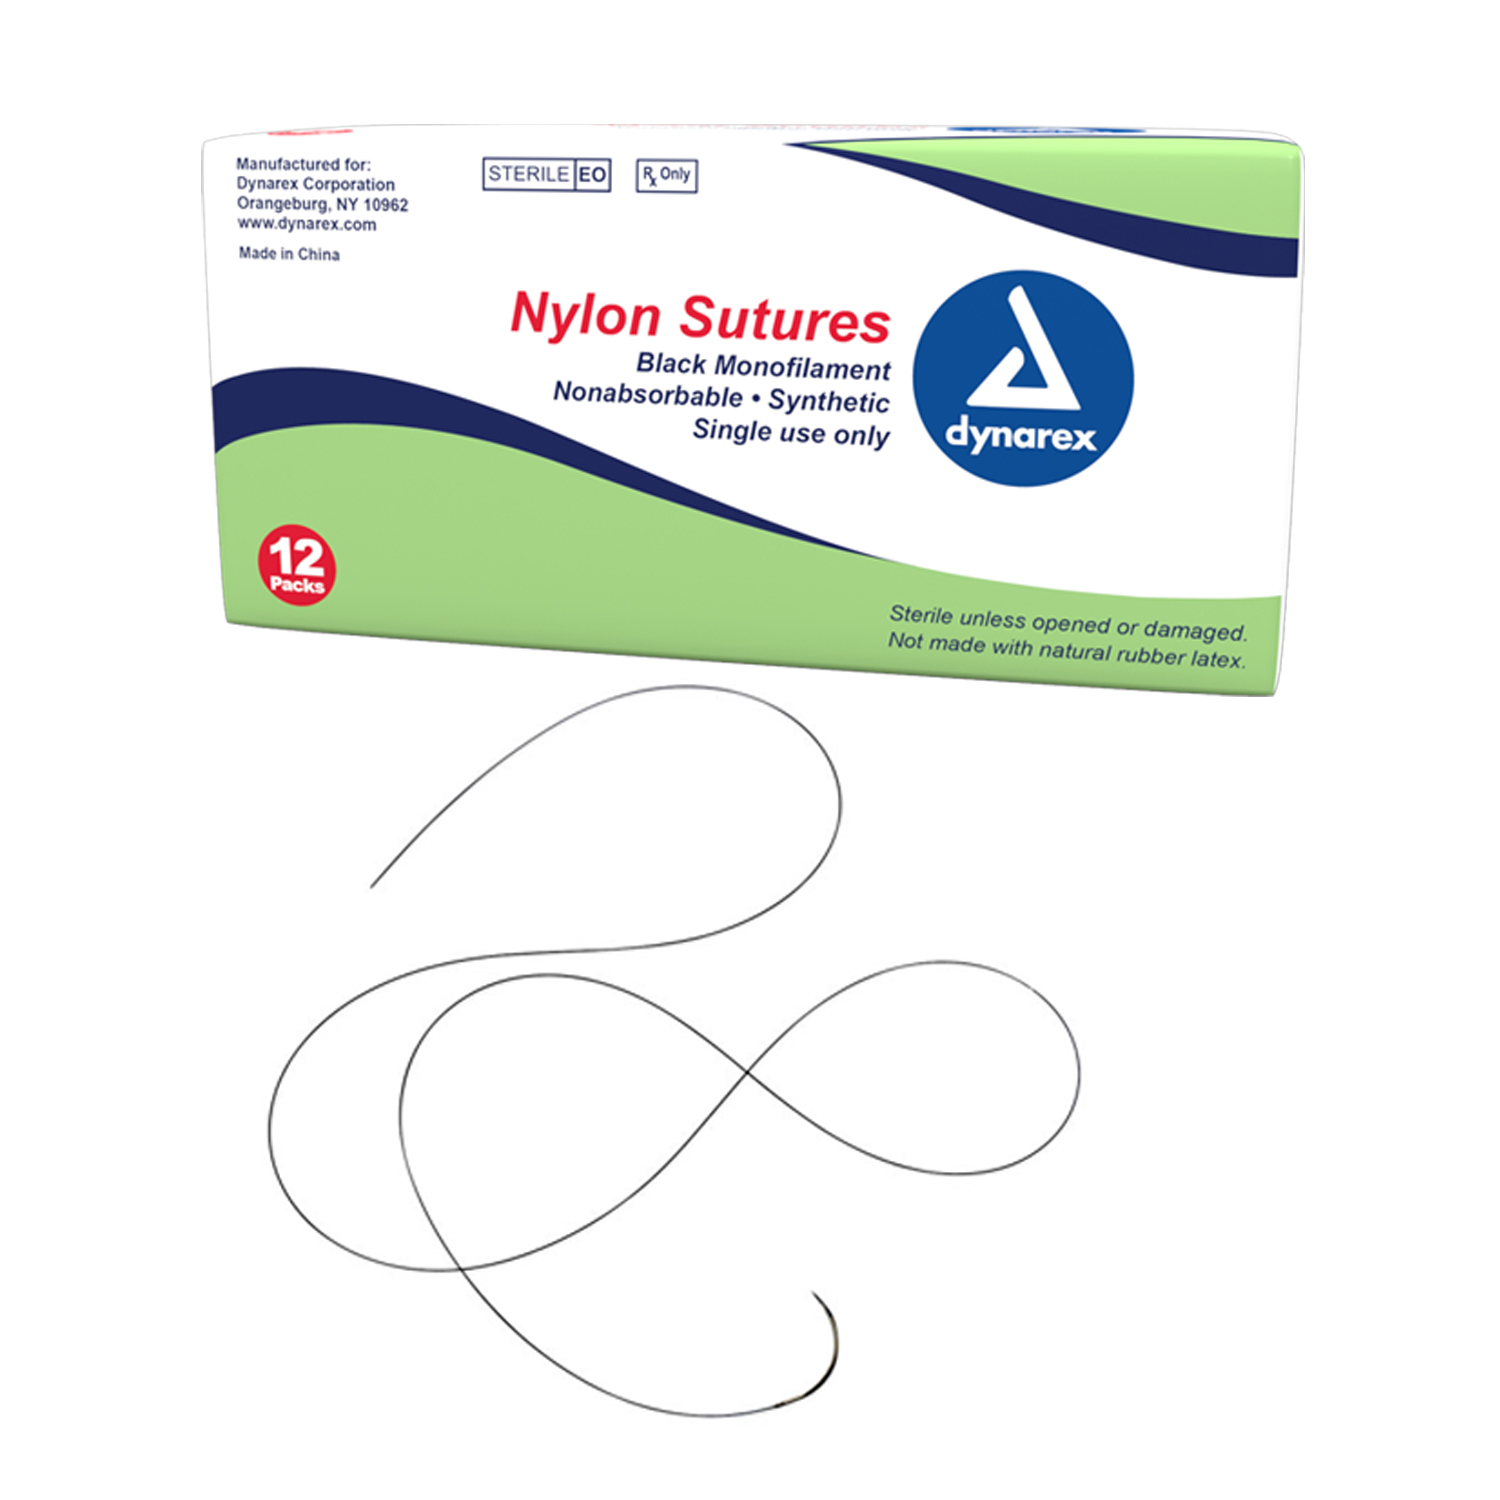 Nylon Sutures-Non Absorbable-Synthetic Black, 3-0, C7 Needle, 18